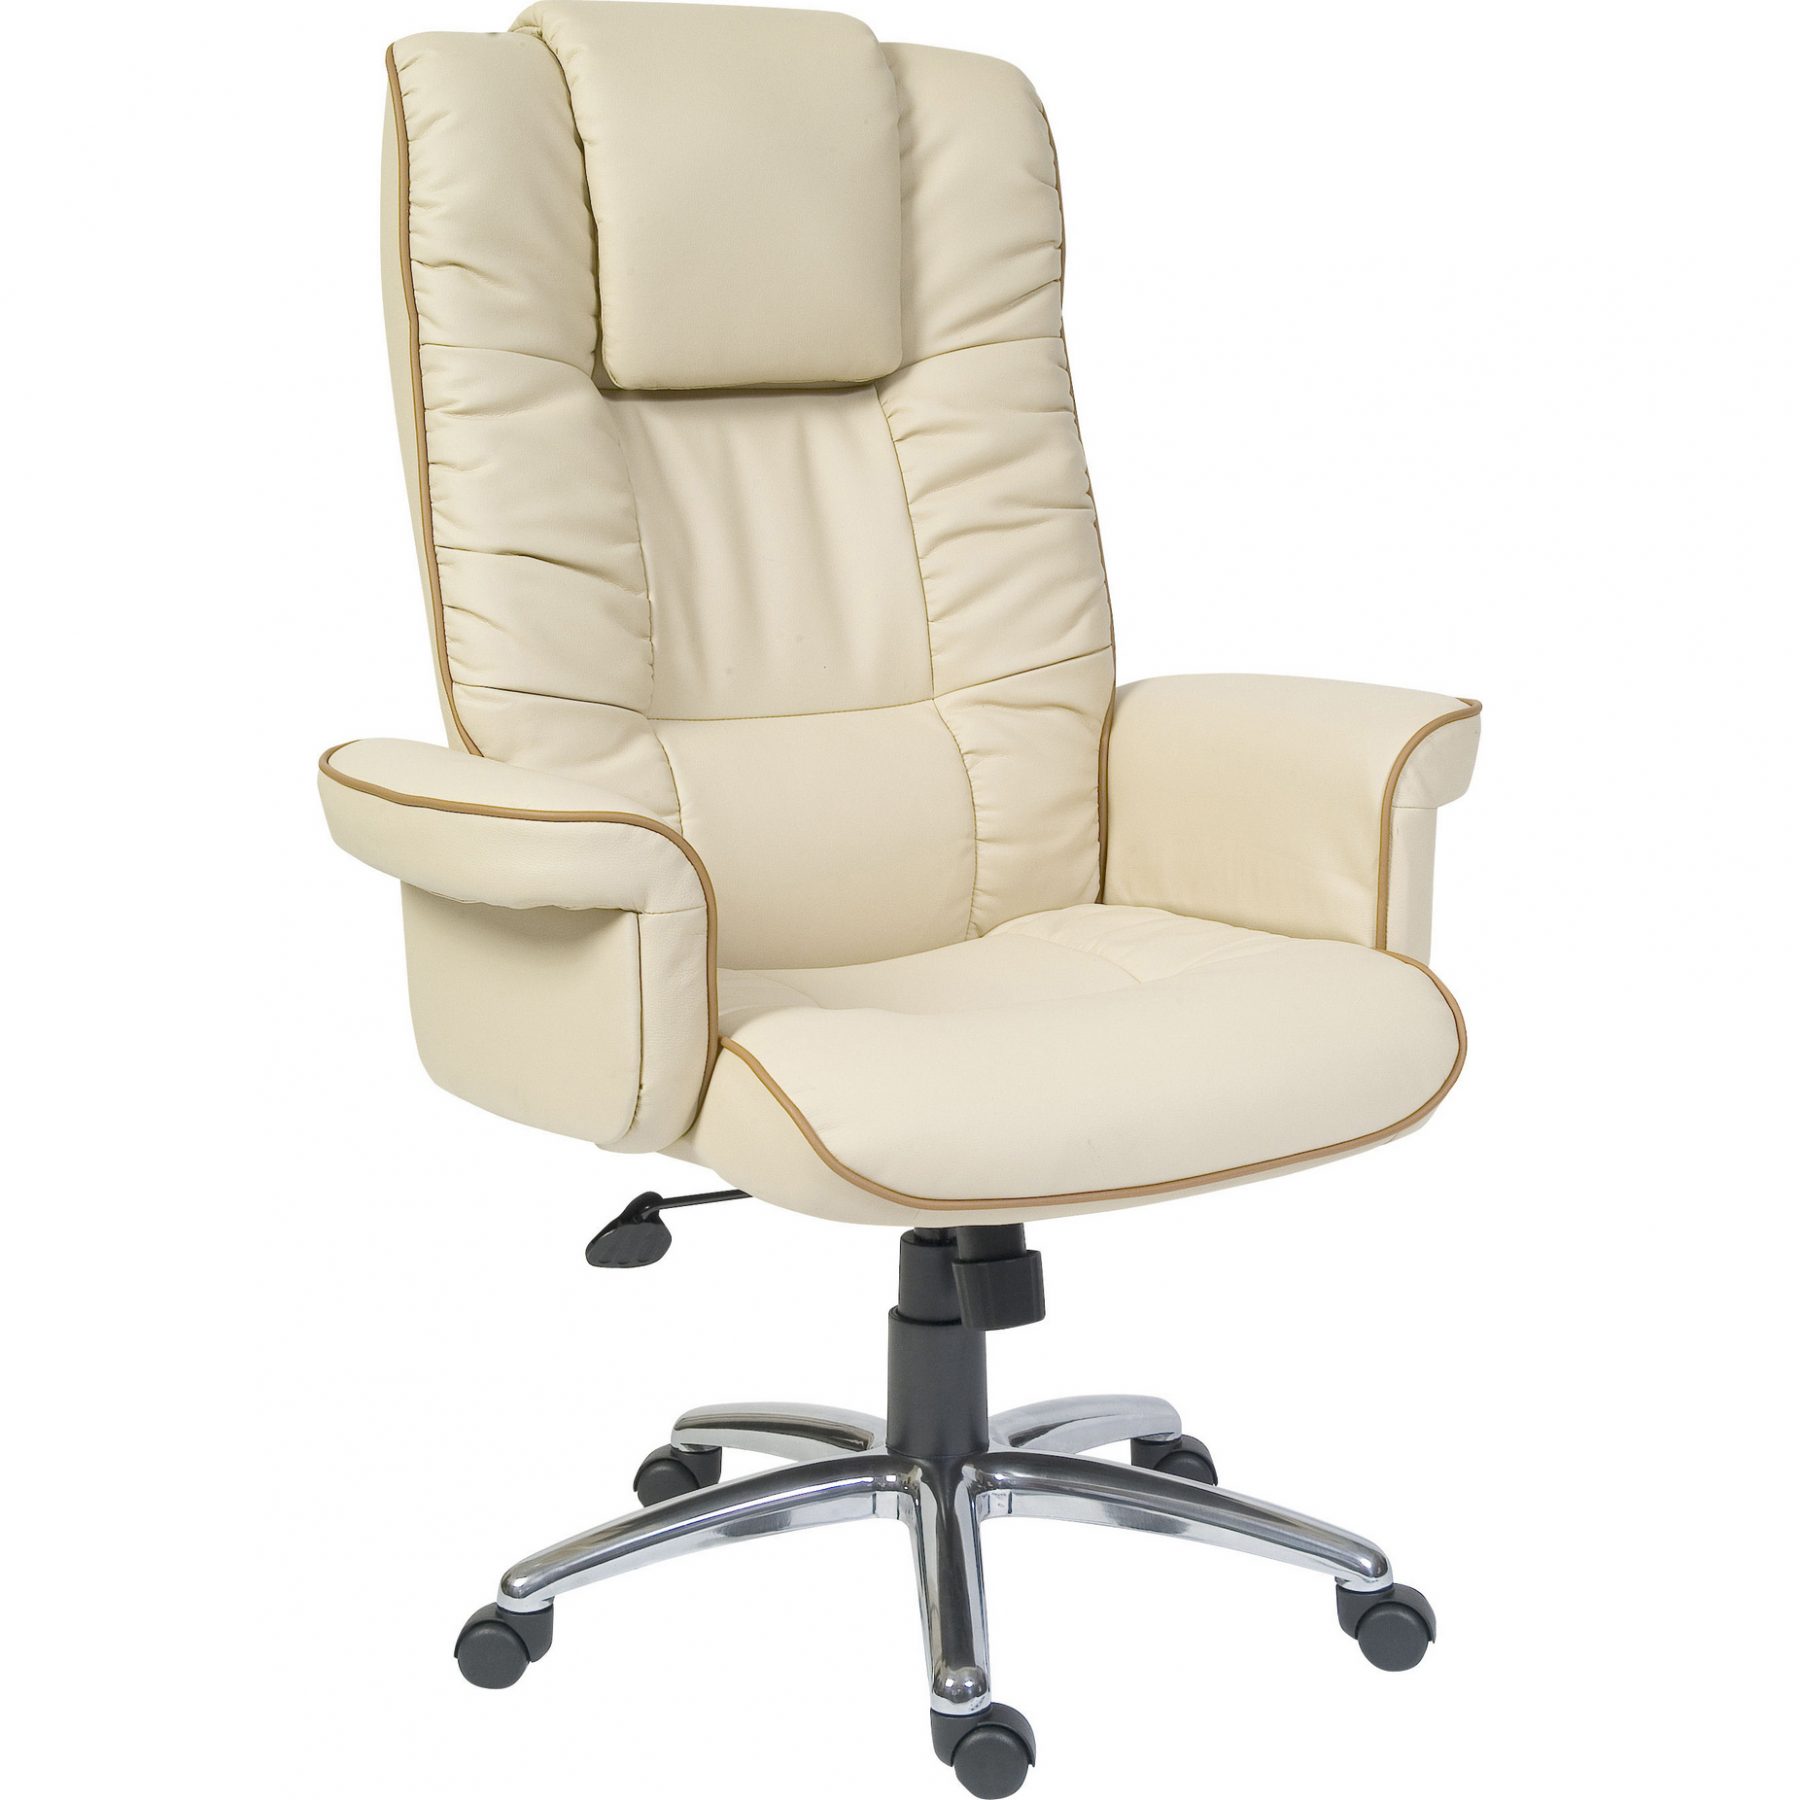 Allure Cream Leather Executive Office Chair | Home Office | FADS